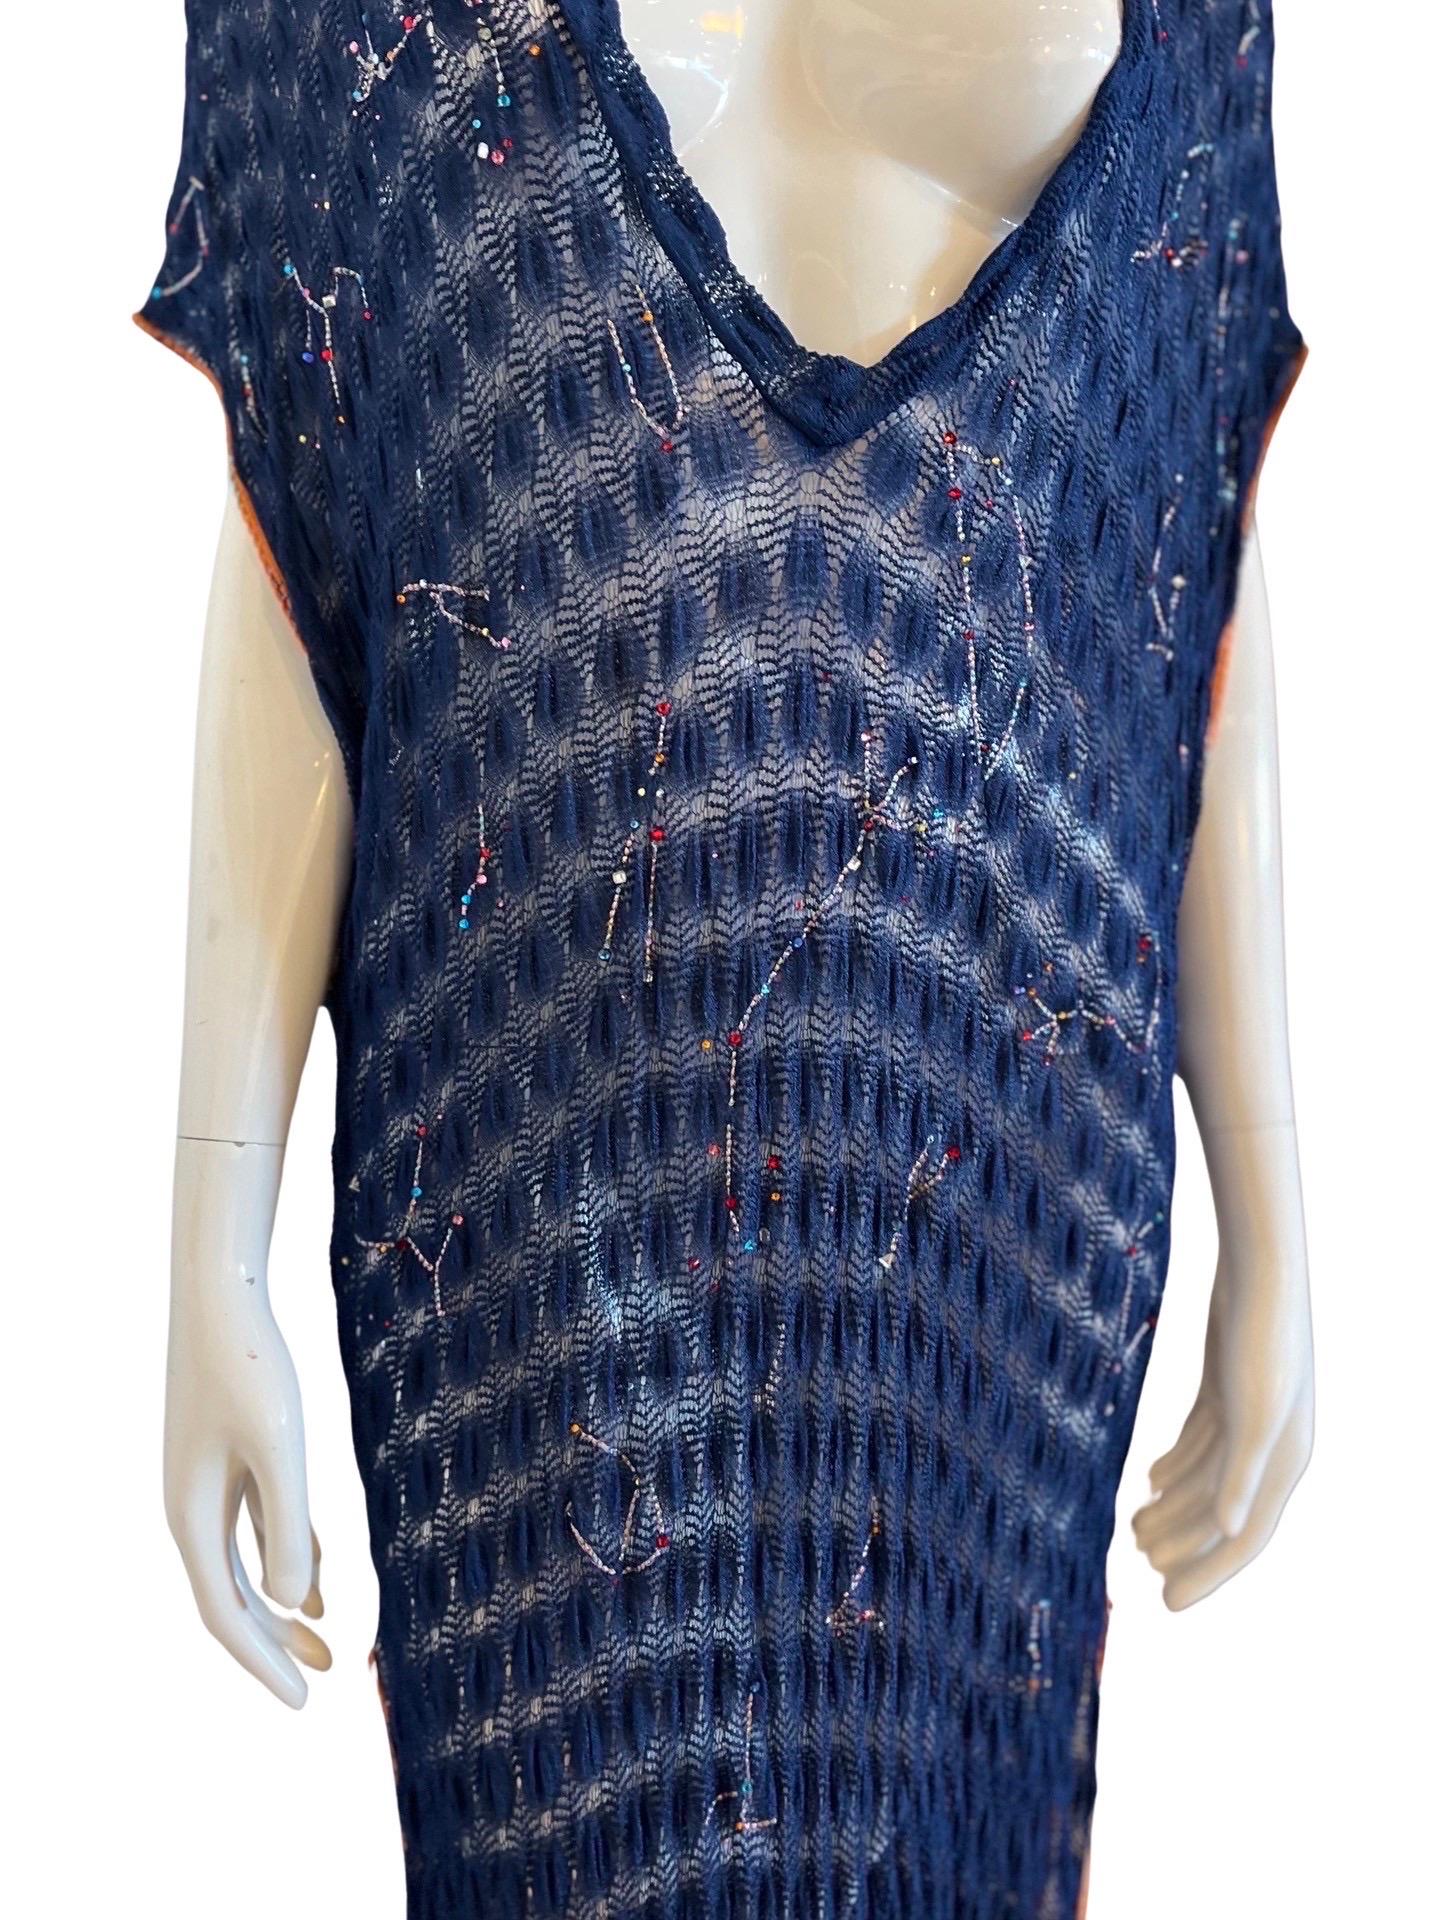 Missoni Mare navy knit kaftan with embroidered and beaded constellations over the front of the dress.  This is a very unique piece that I have never seen before with Missoni. 

The constellations are done with multi colored metallic thread and